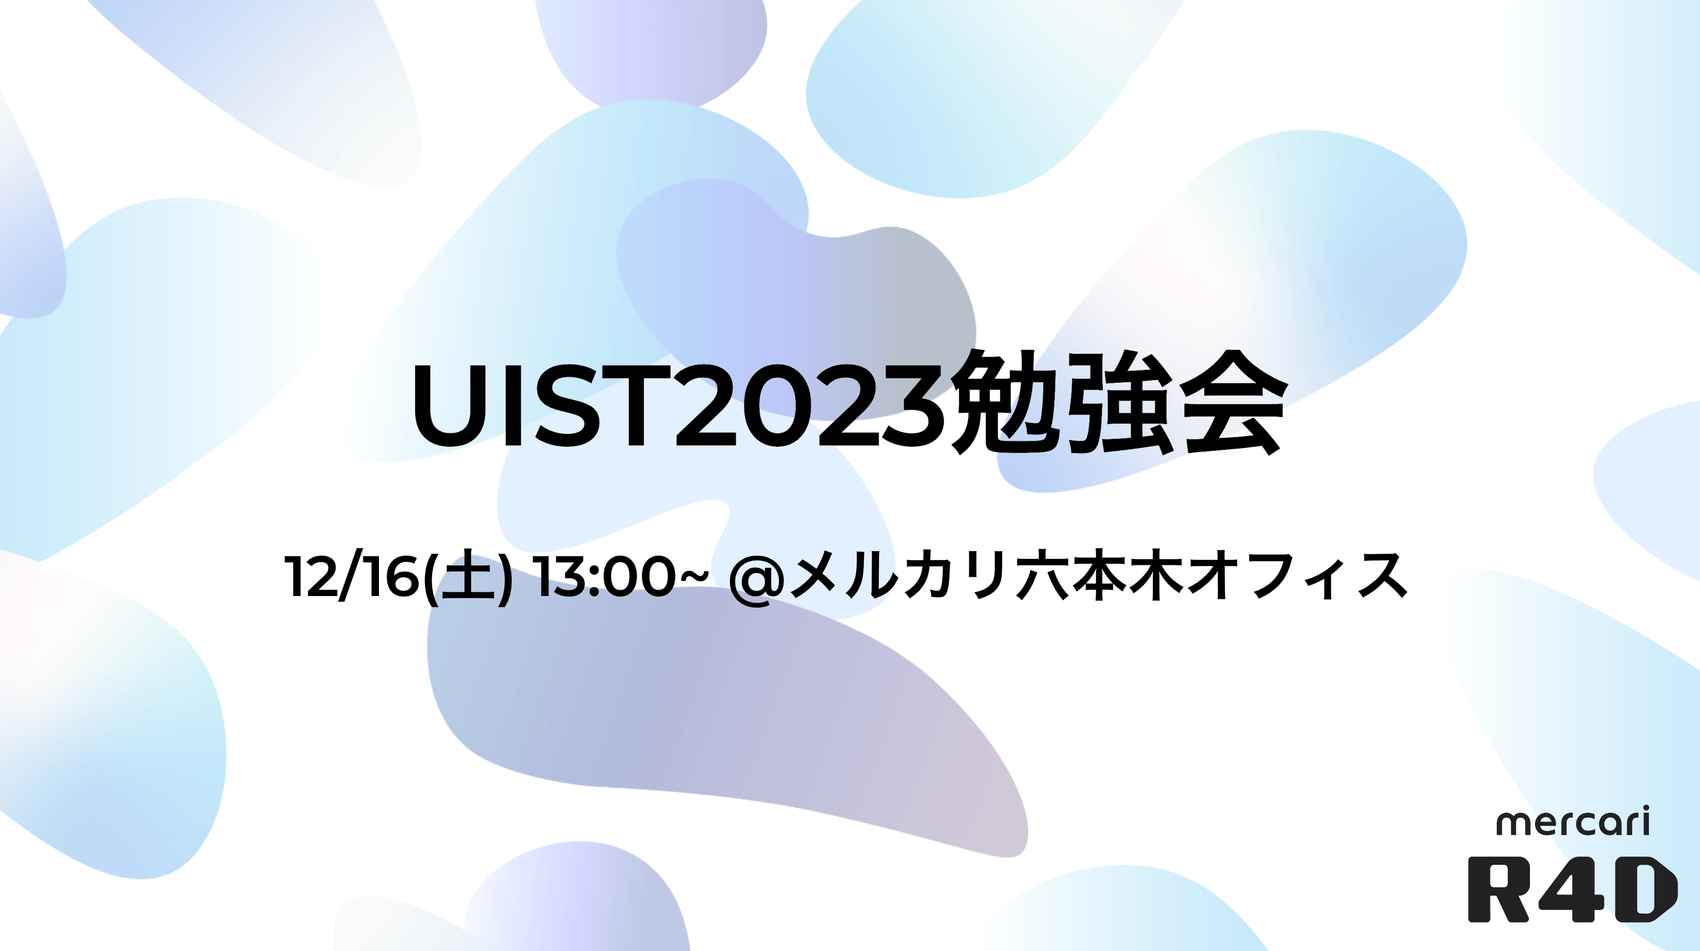 Mercari Roppongi Hills Office to Host UIST 2023 Study Group on Saturday, December 16